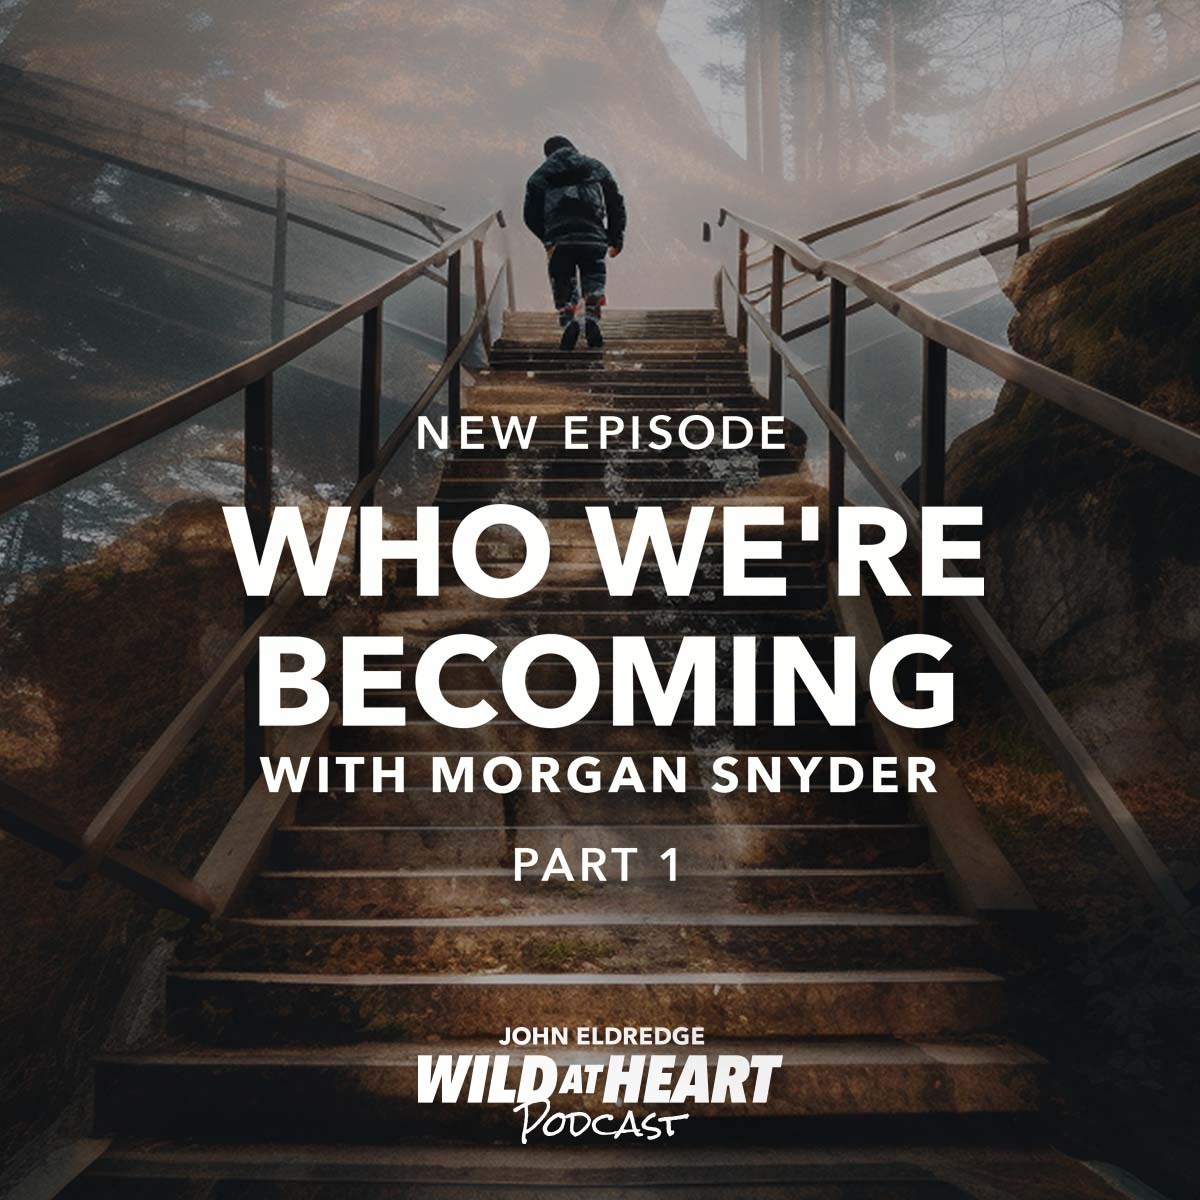 How has your life changed over the past decade? Craig, Morgan, and Allen take turns answering that question in this poignant series from 2015—starting with Morgan's story. bit.ly/3CpFEJm